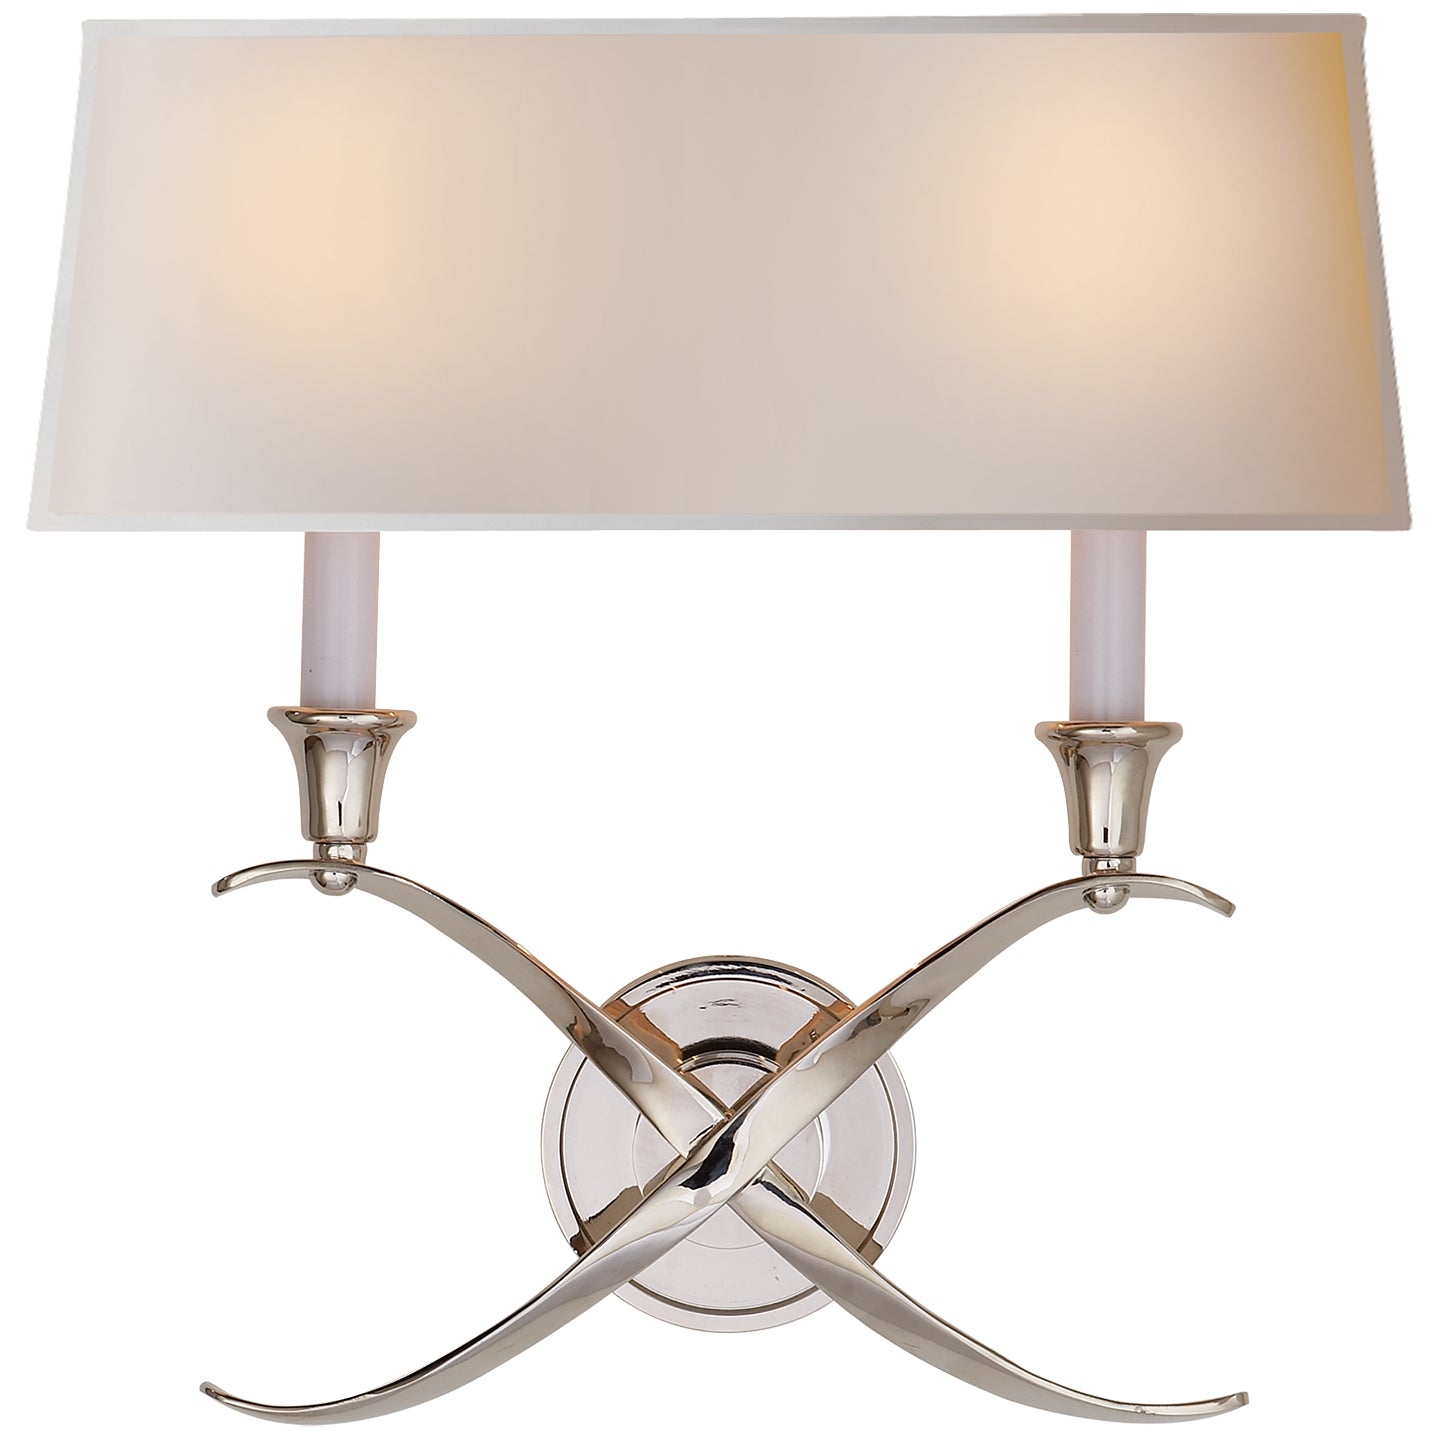 Visual Comfort Signature - CHD 1191PN-NP - Two Light Wall Sconce - Cross Bouillotte - Polished Nickel